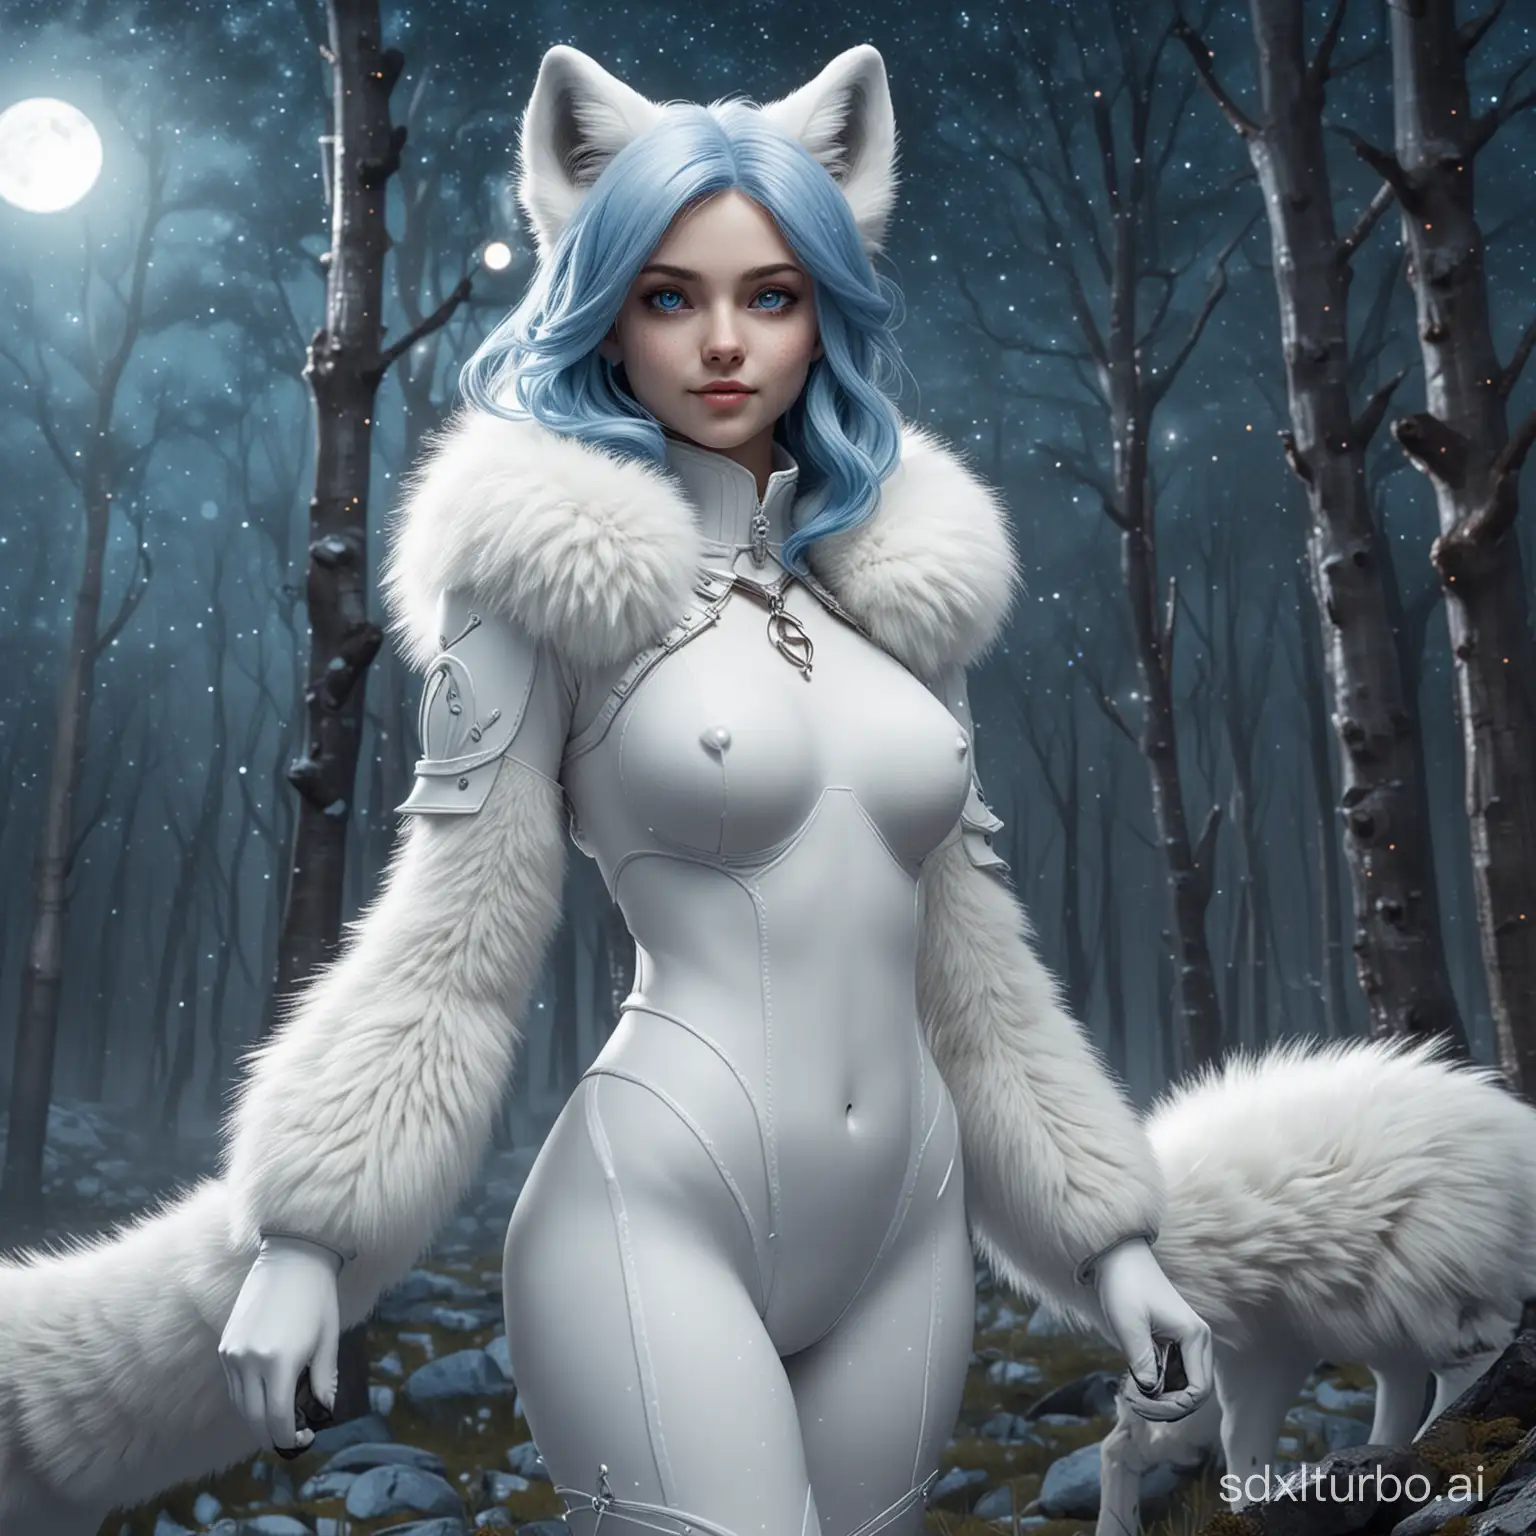 Arctic-Fox-Anthro-Female-Portrait-in-Fantasy-Forest-with-Starry-Night-Sky